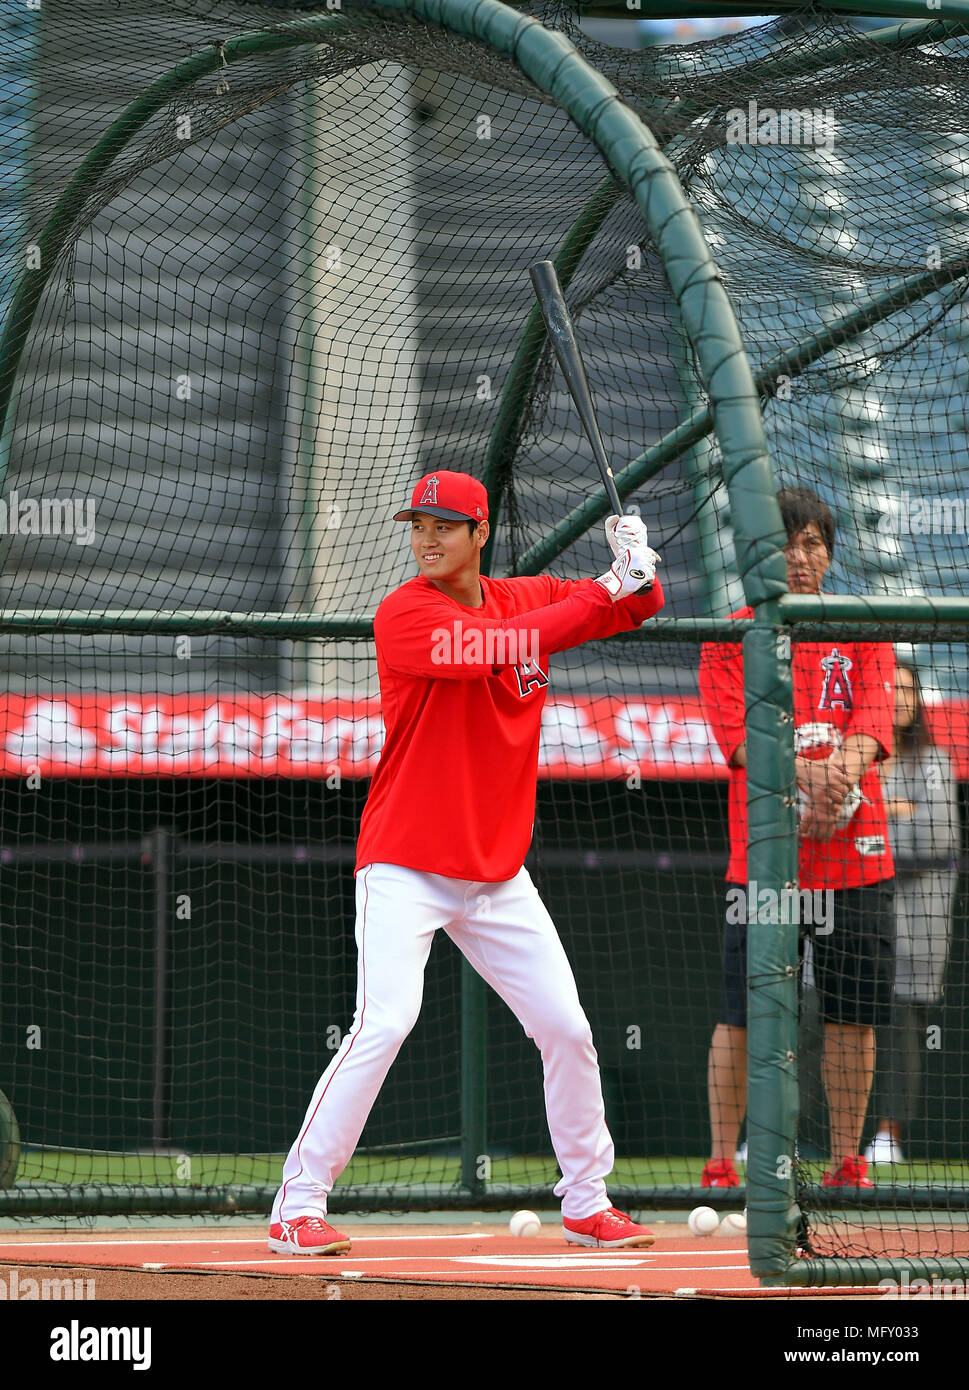 Shohei Ohtani of the Los Angeles Angels takes batting practice